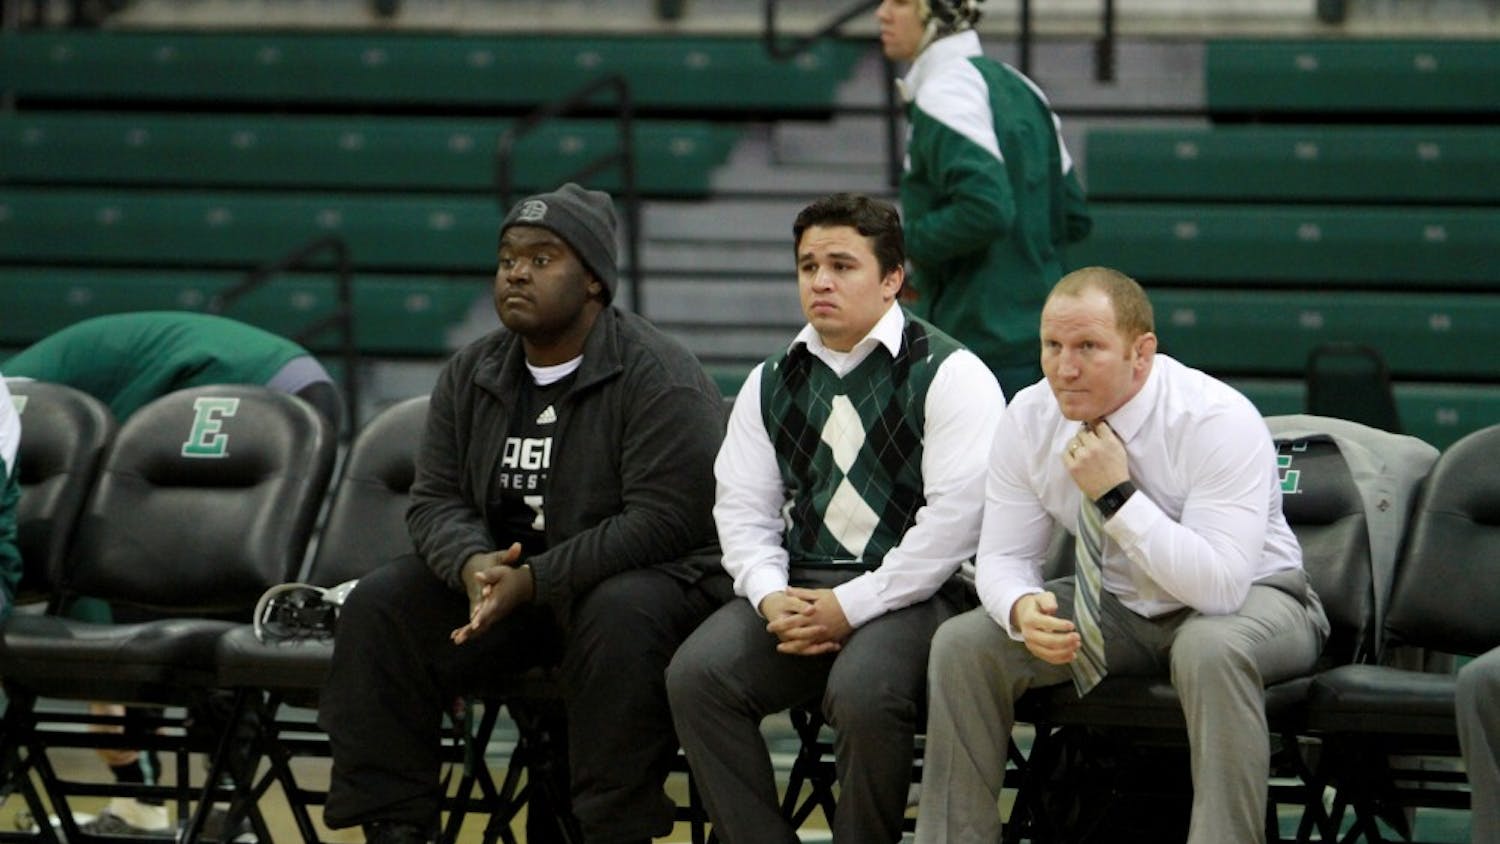 EMU student Ramone Williams, who was previously homeless, is named honorary captain during the match against Kent State at the Convocation Center in Ypsilanti on Sunday January 17, 2016.